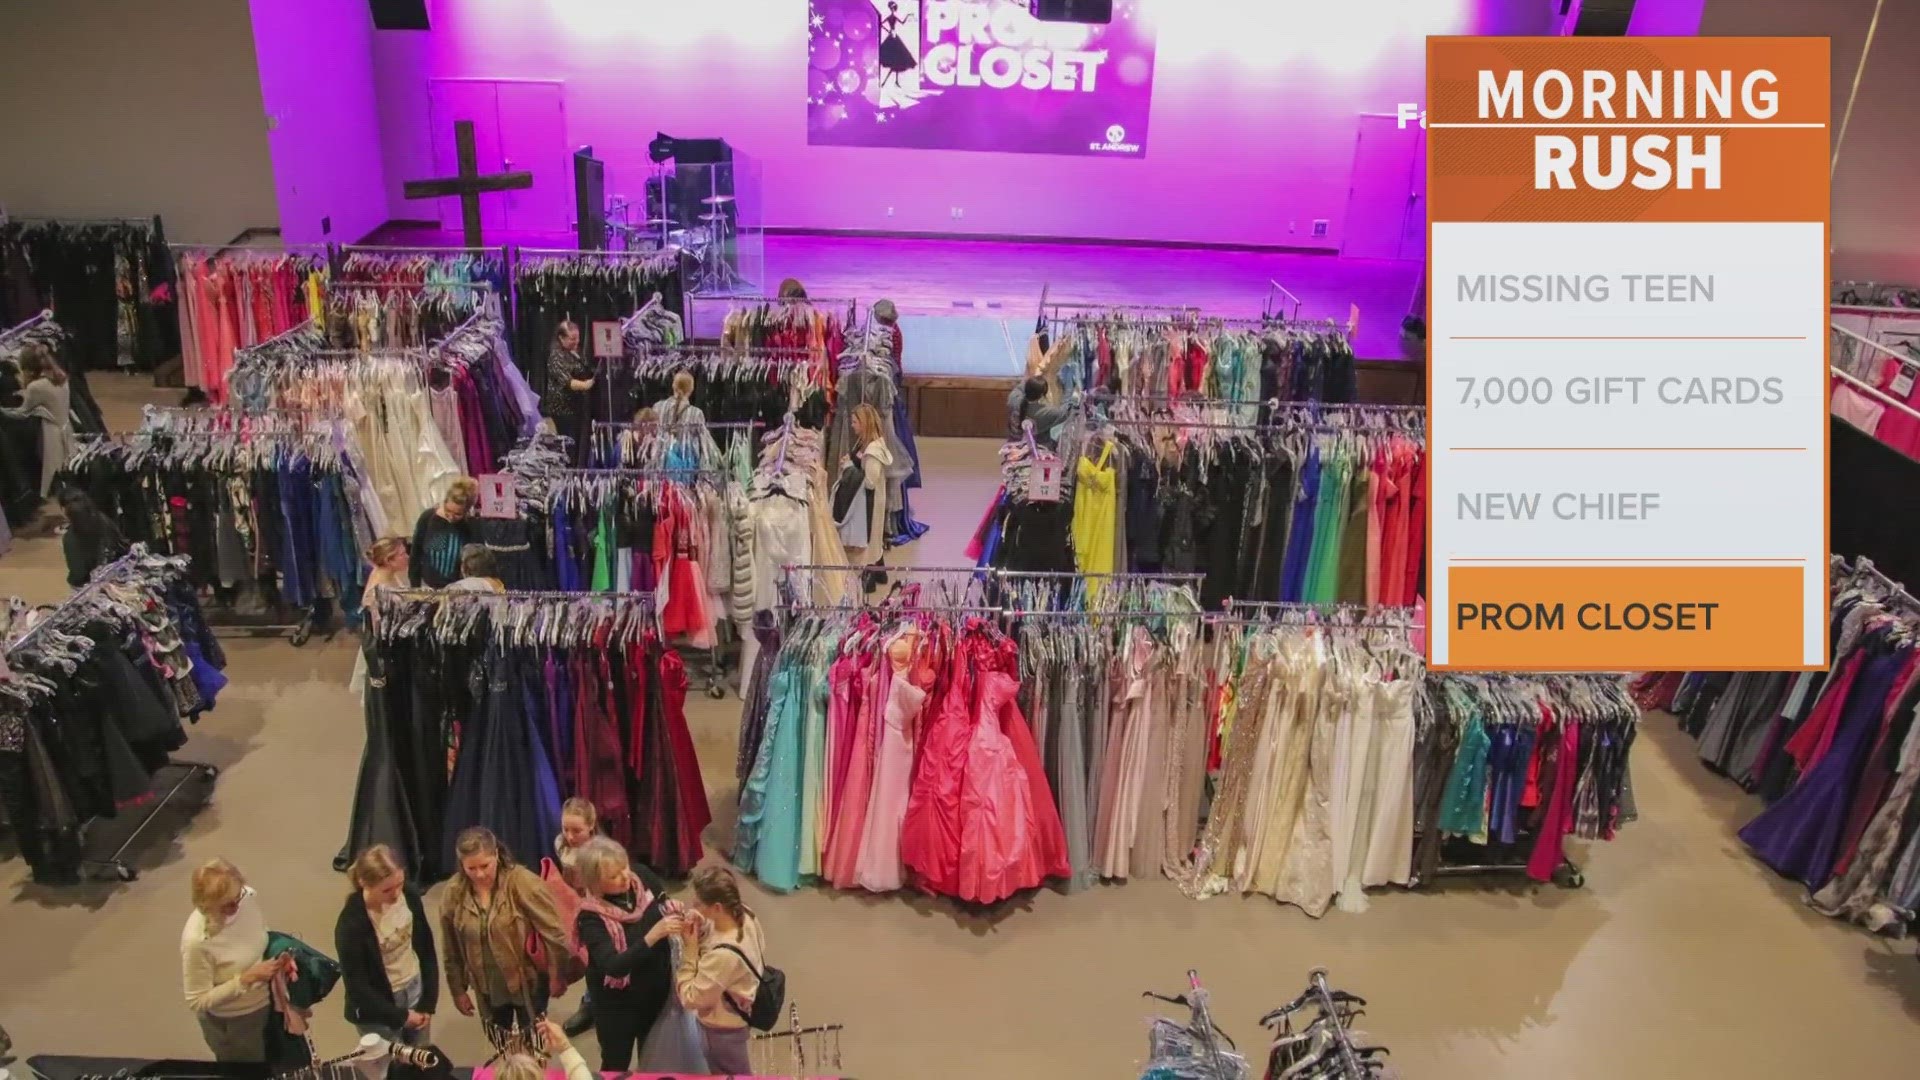 St. Andrew Methodist Church has launched its 15th annual Prom Closet, which provides free dresses, shoes, purses, jewelry and more for high school girls.